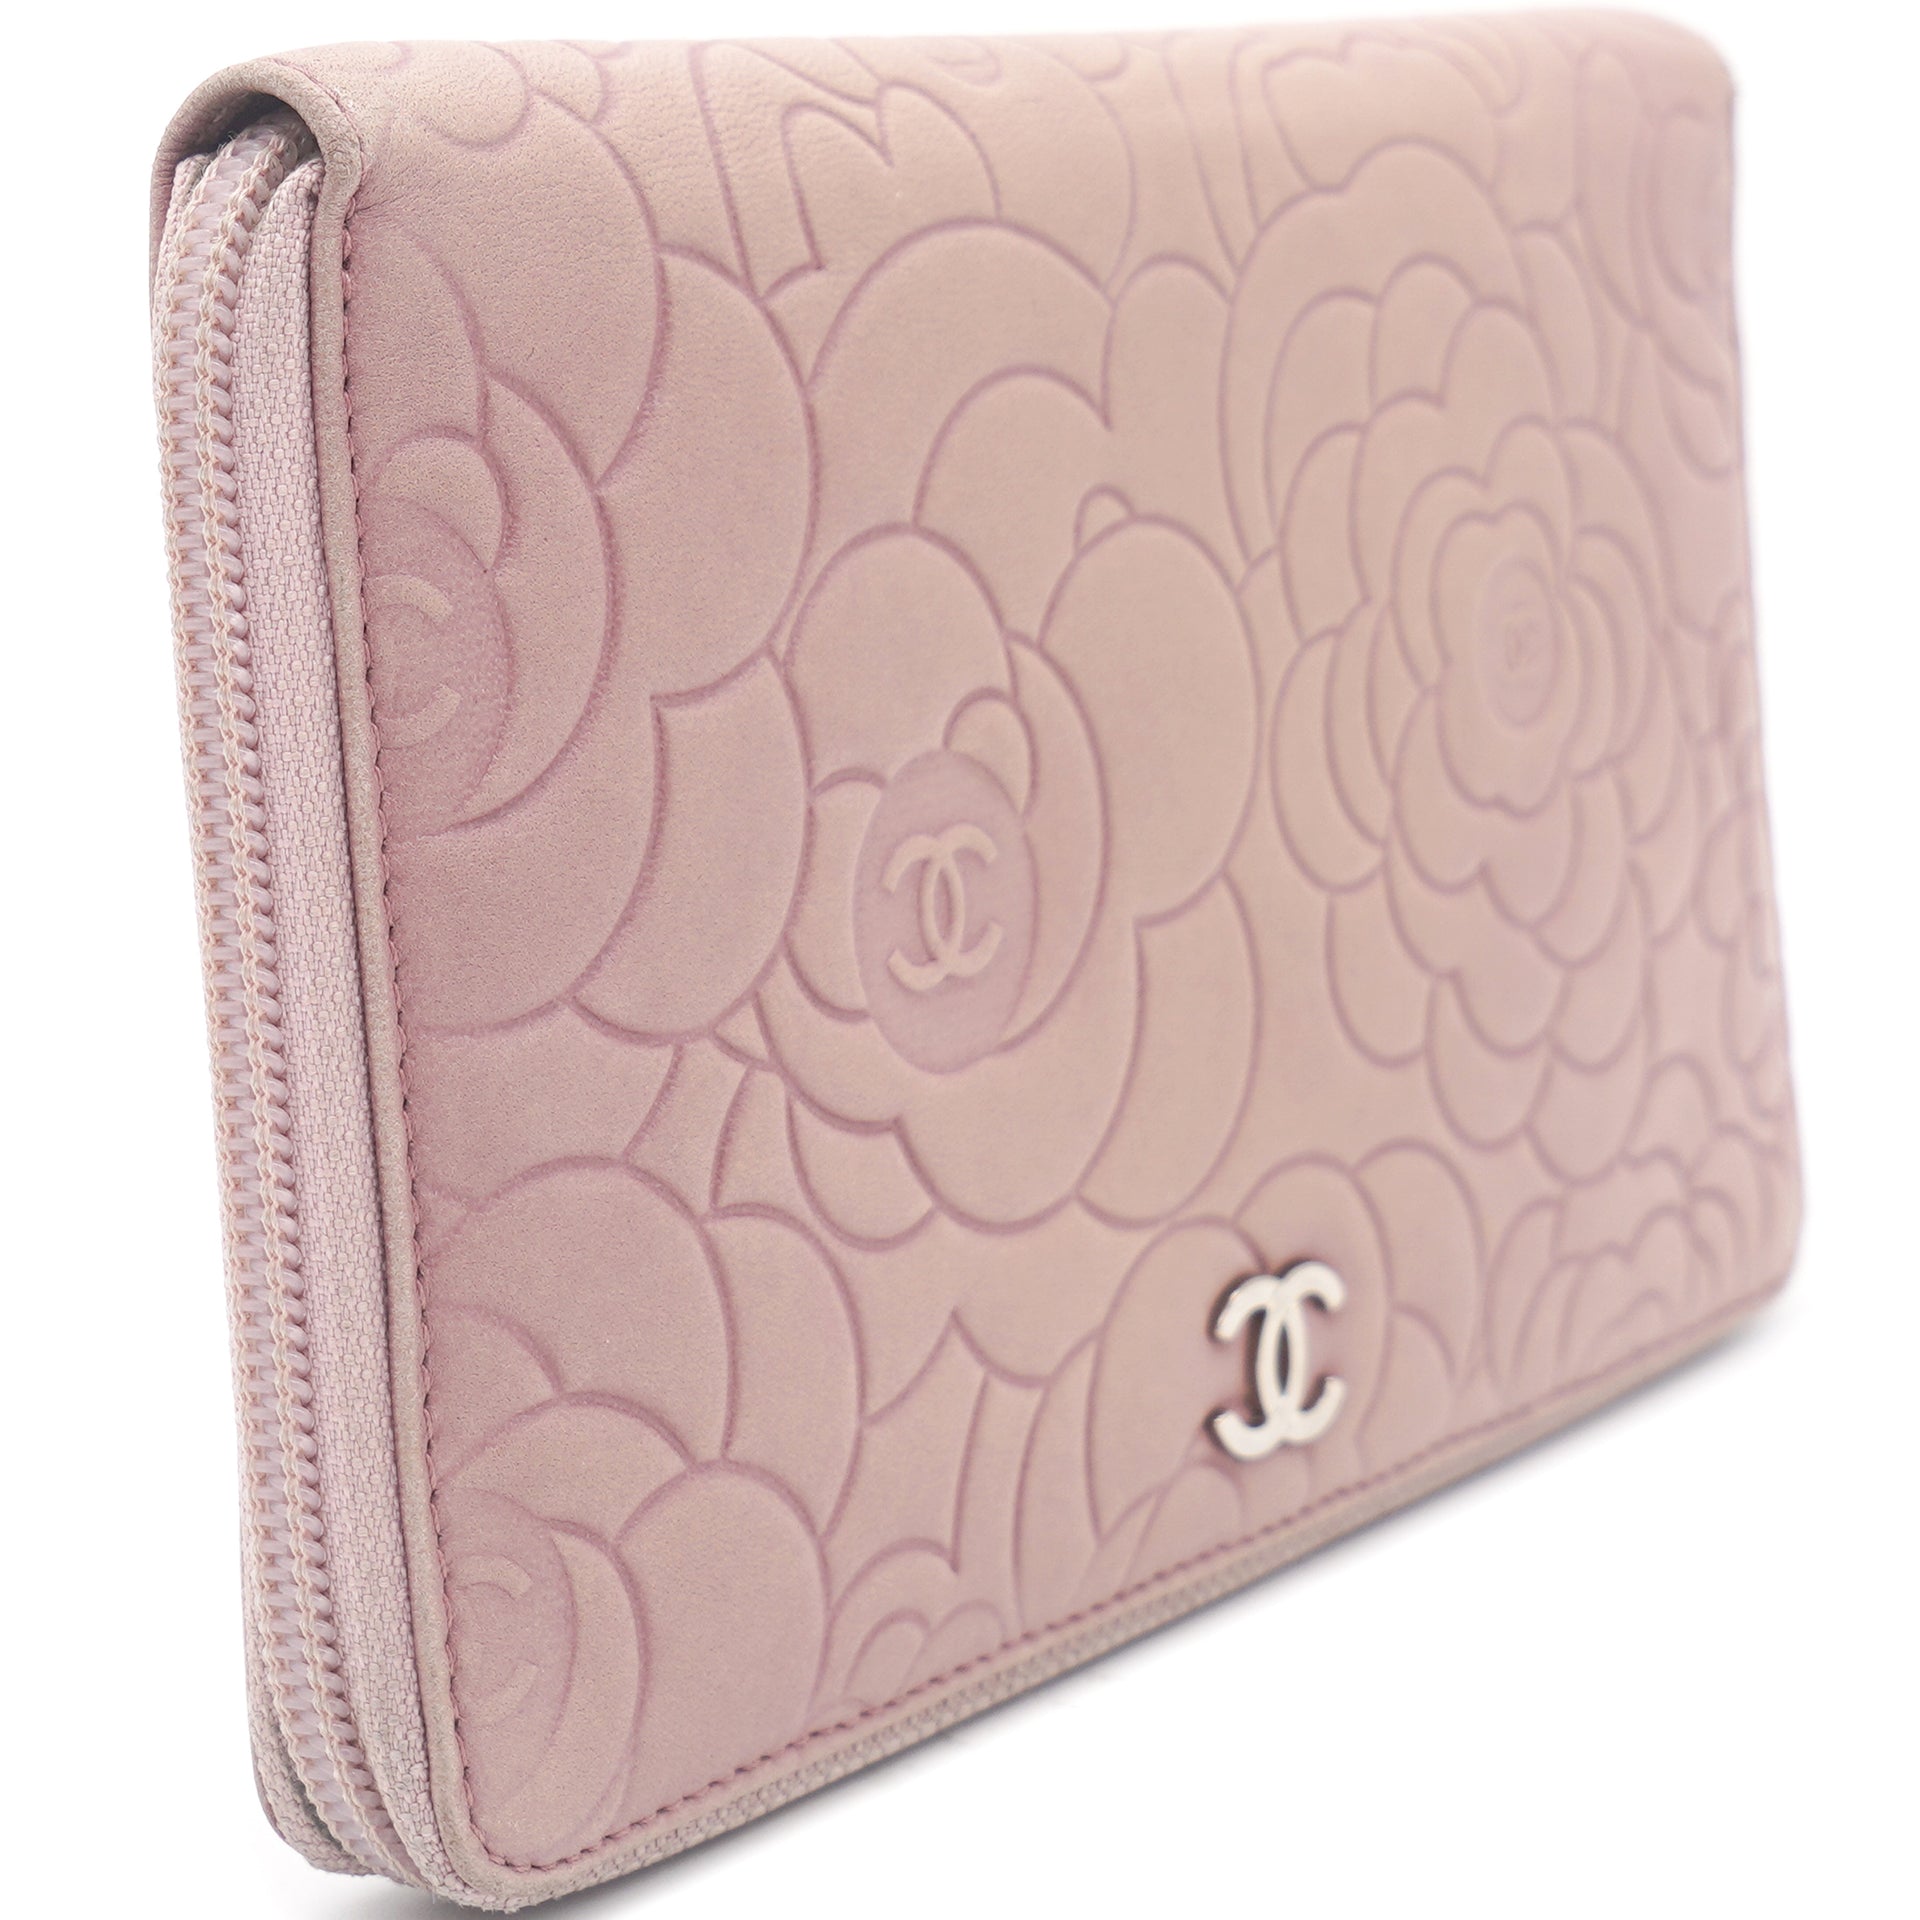 Chanel Clutch Lambskin Camellia Embossed Pink Wallet On A Chain